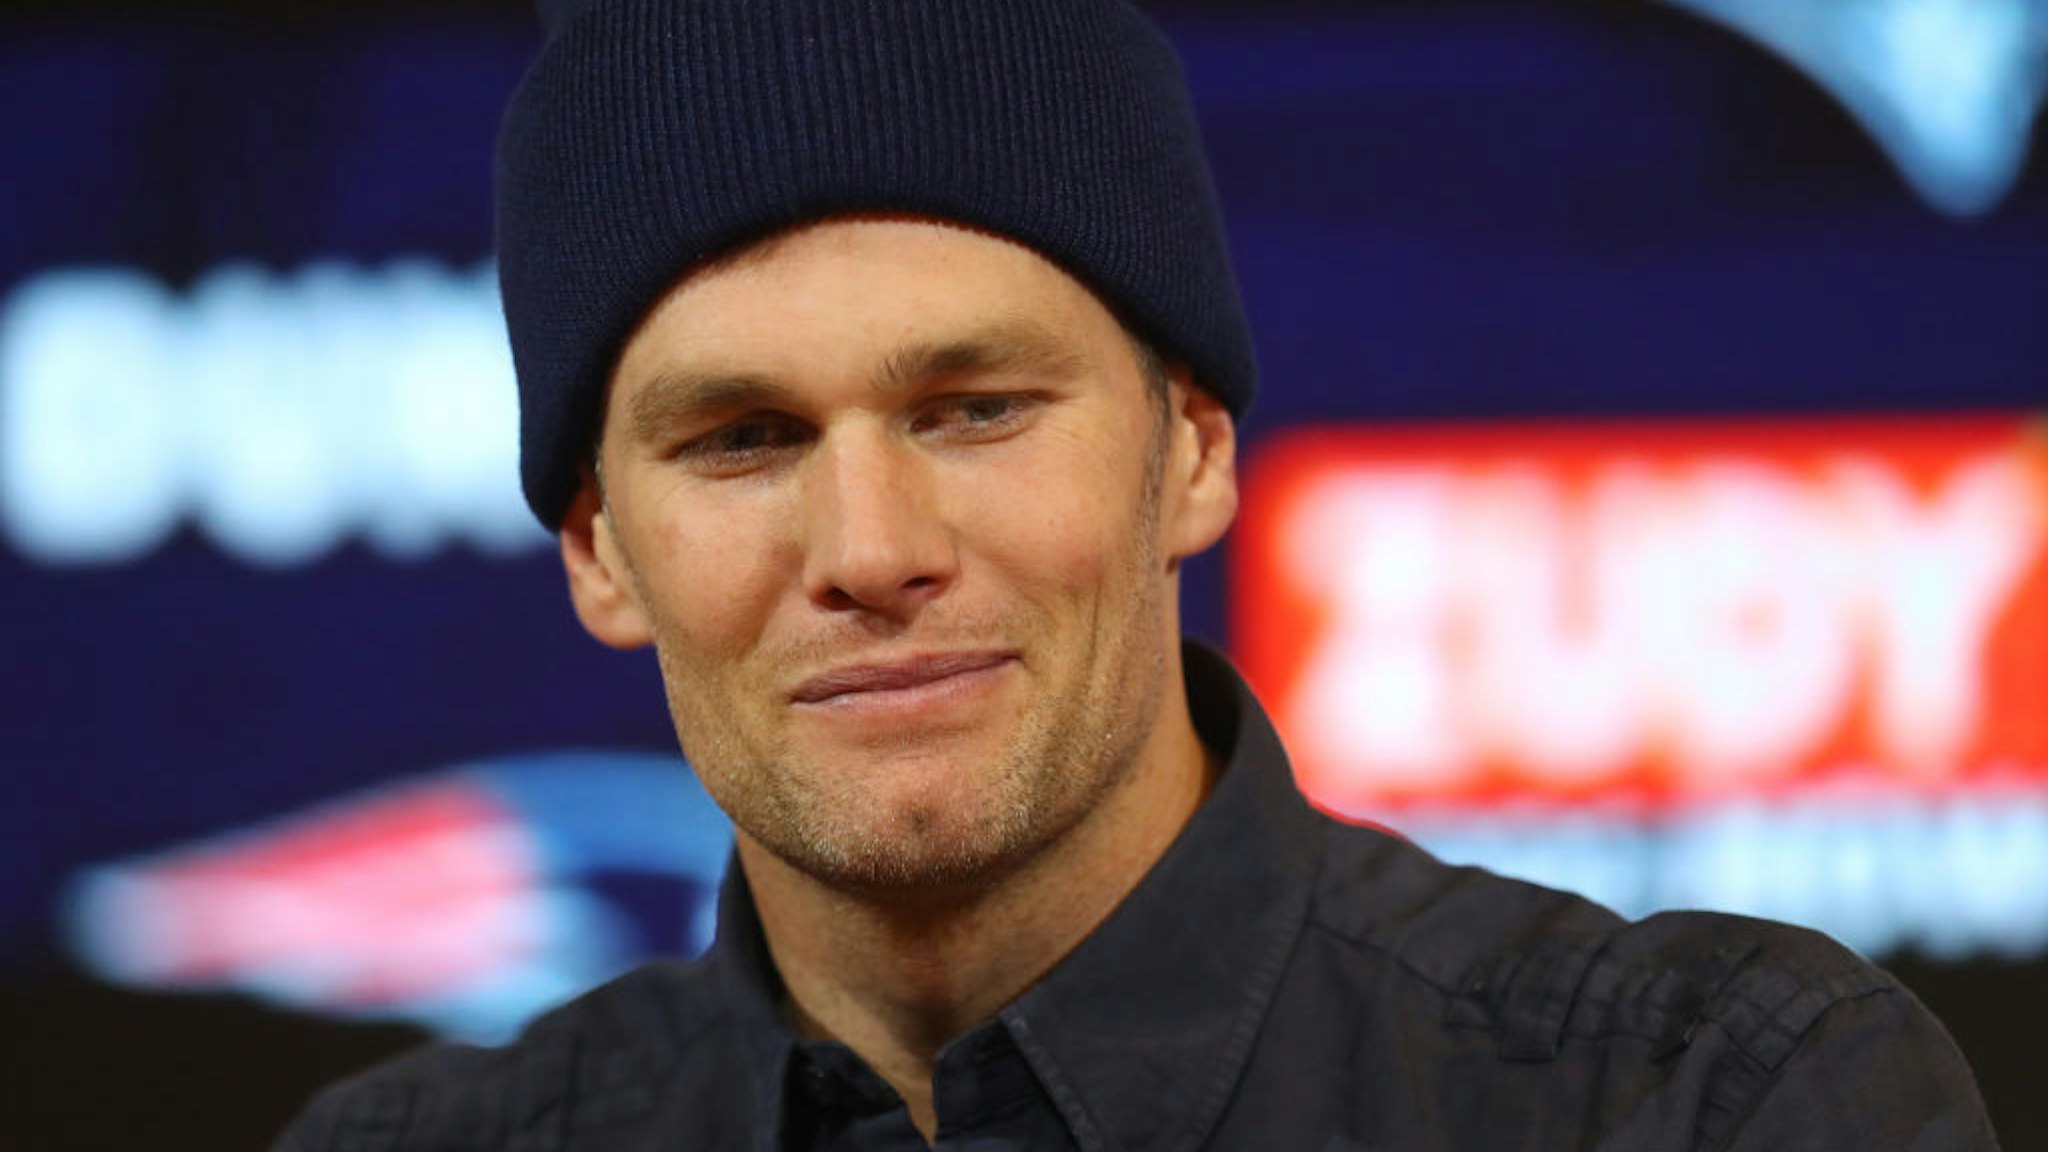 Tom Brady #12 of the New England Patriots talks with the media during a press conference after the AFC Wild Card Playoff game against the Tennessee Titans at Gillette Stadium on January 04, 2020 in Foxborough, Massachusetts